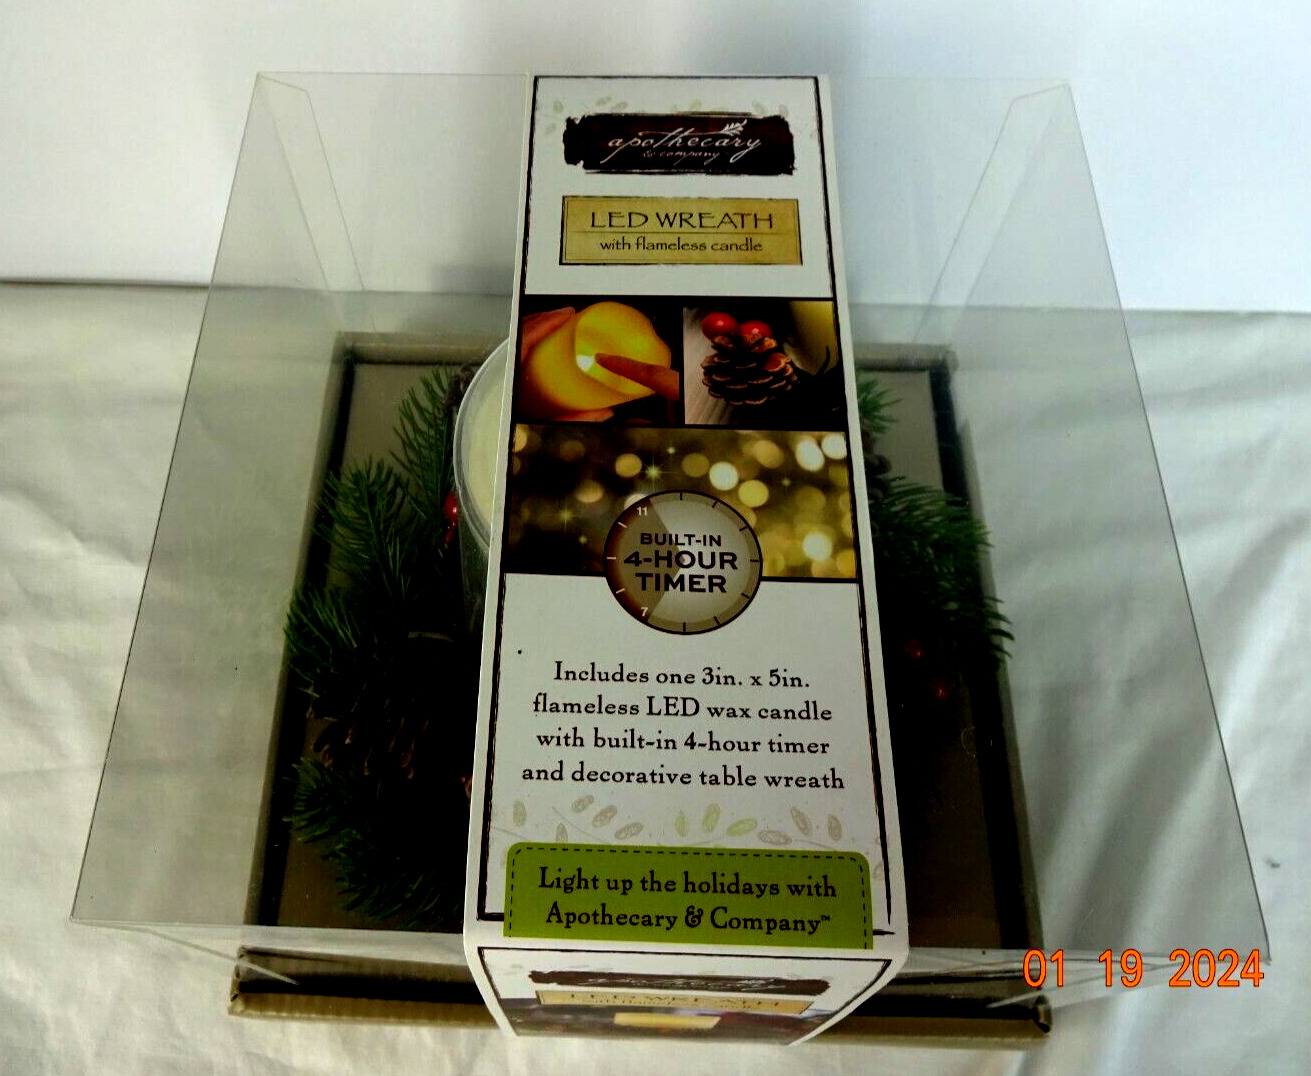 Christmas, Tabletop Wreath, Flameless LED light, 4hr timer, Apothecary Co. China